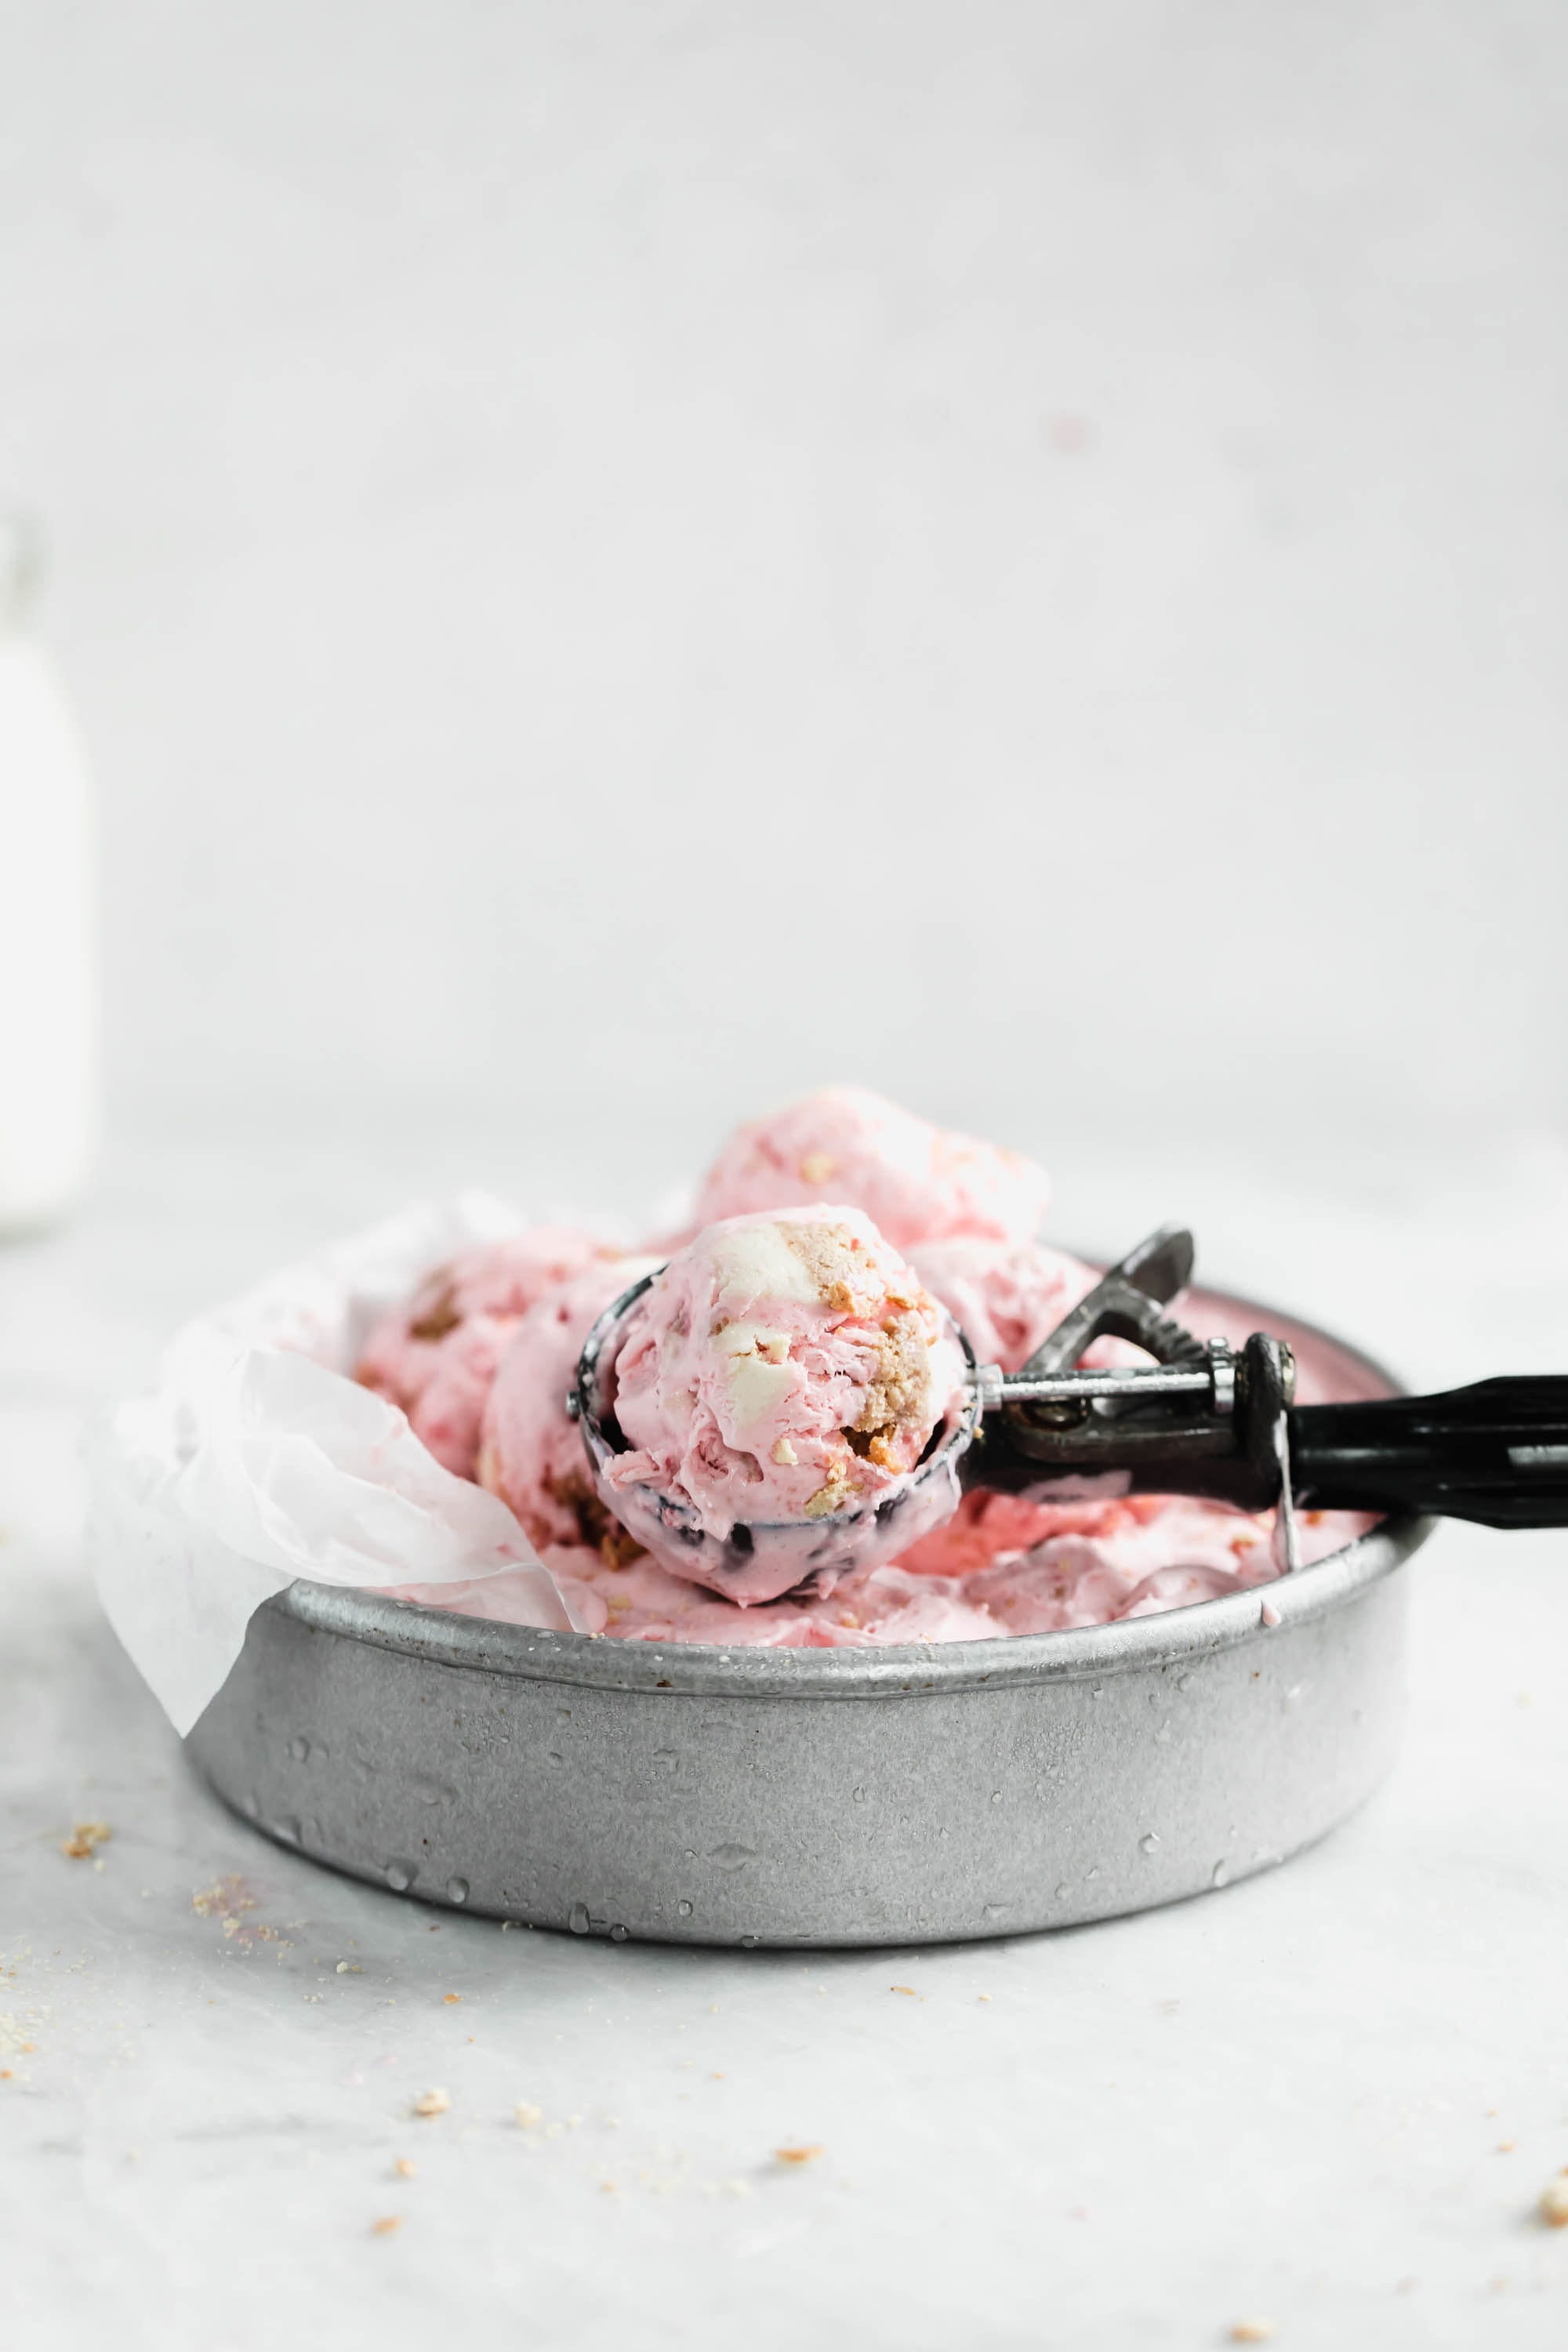 Kick off ice cream season with this easy and delicious no churn strawberry cheesecake ice cream. Creamy strawberry ice cream mixed with chunks of cheesecake. YUM.